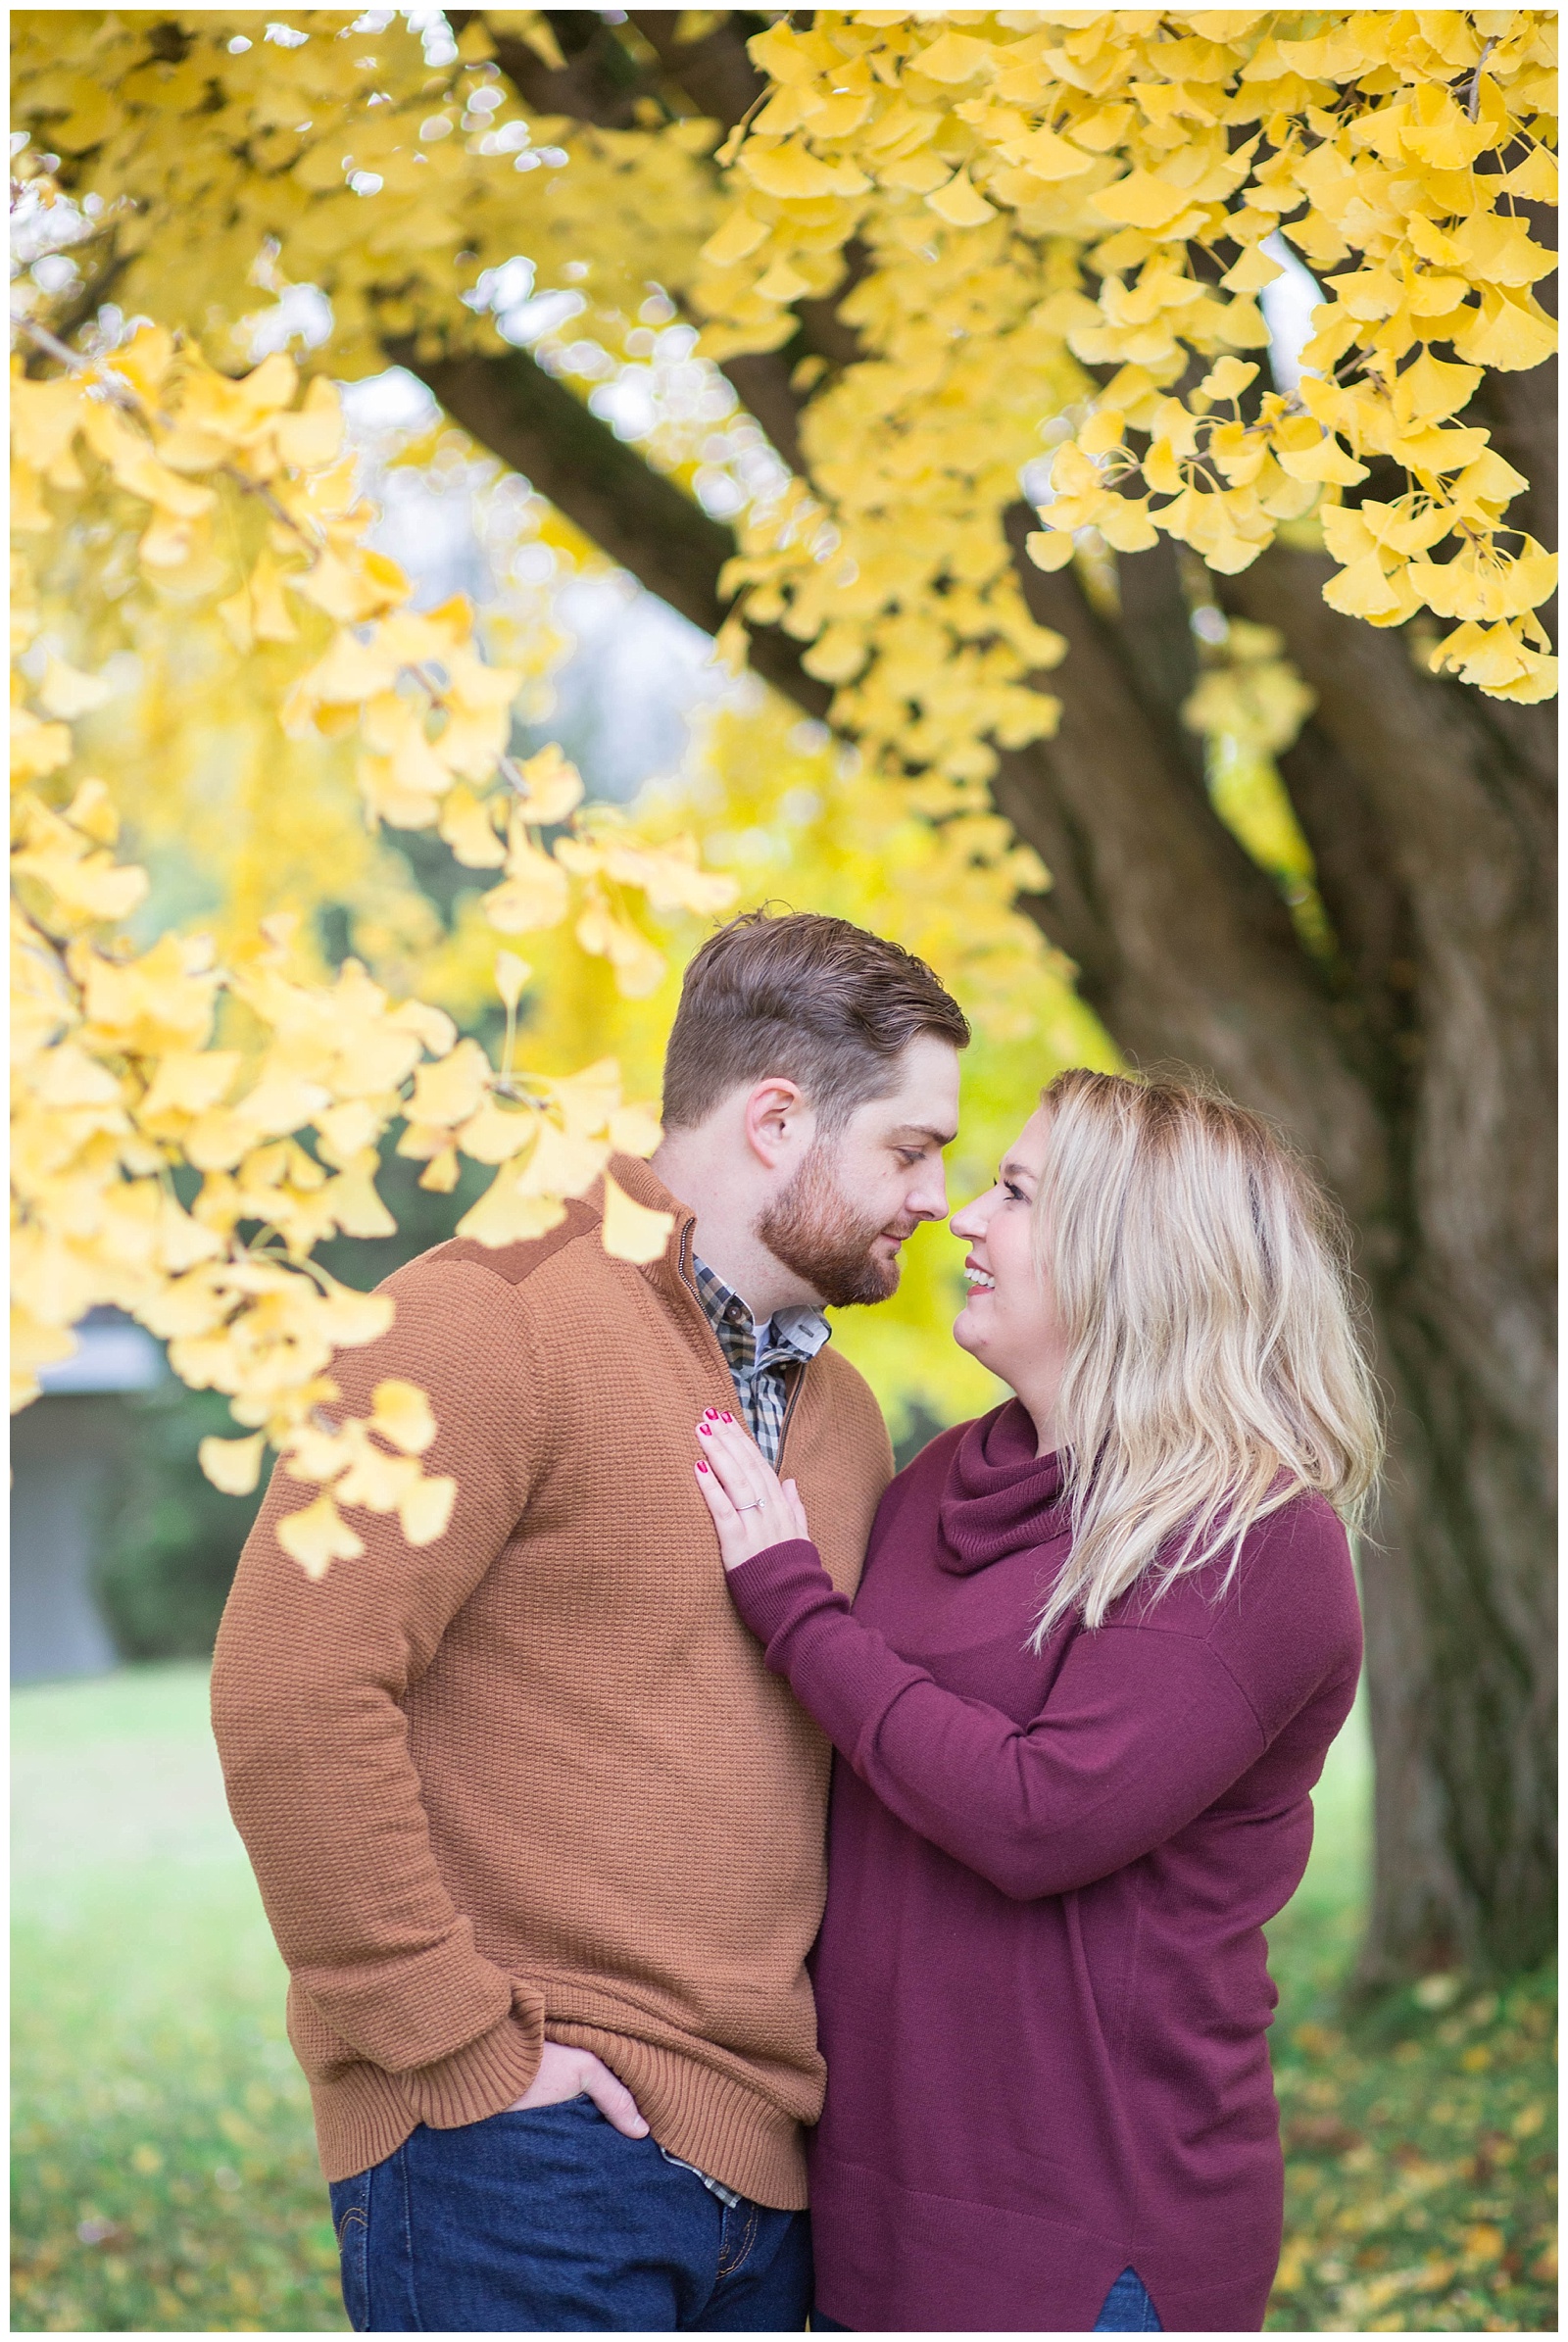 Fall Engagement Session | Monica Brown Photography | monicabrownphoto.com